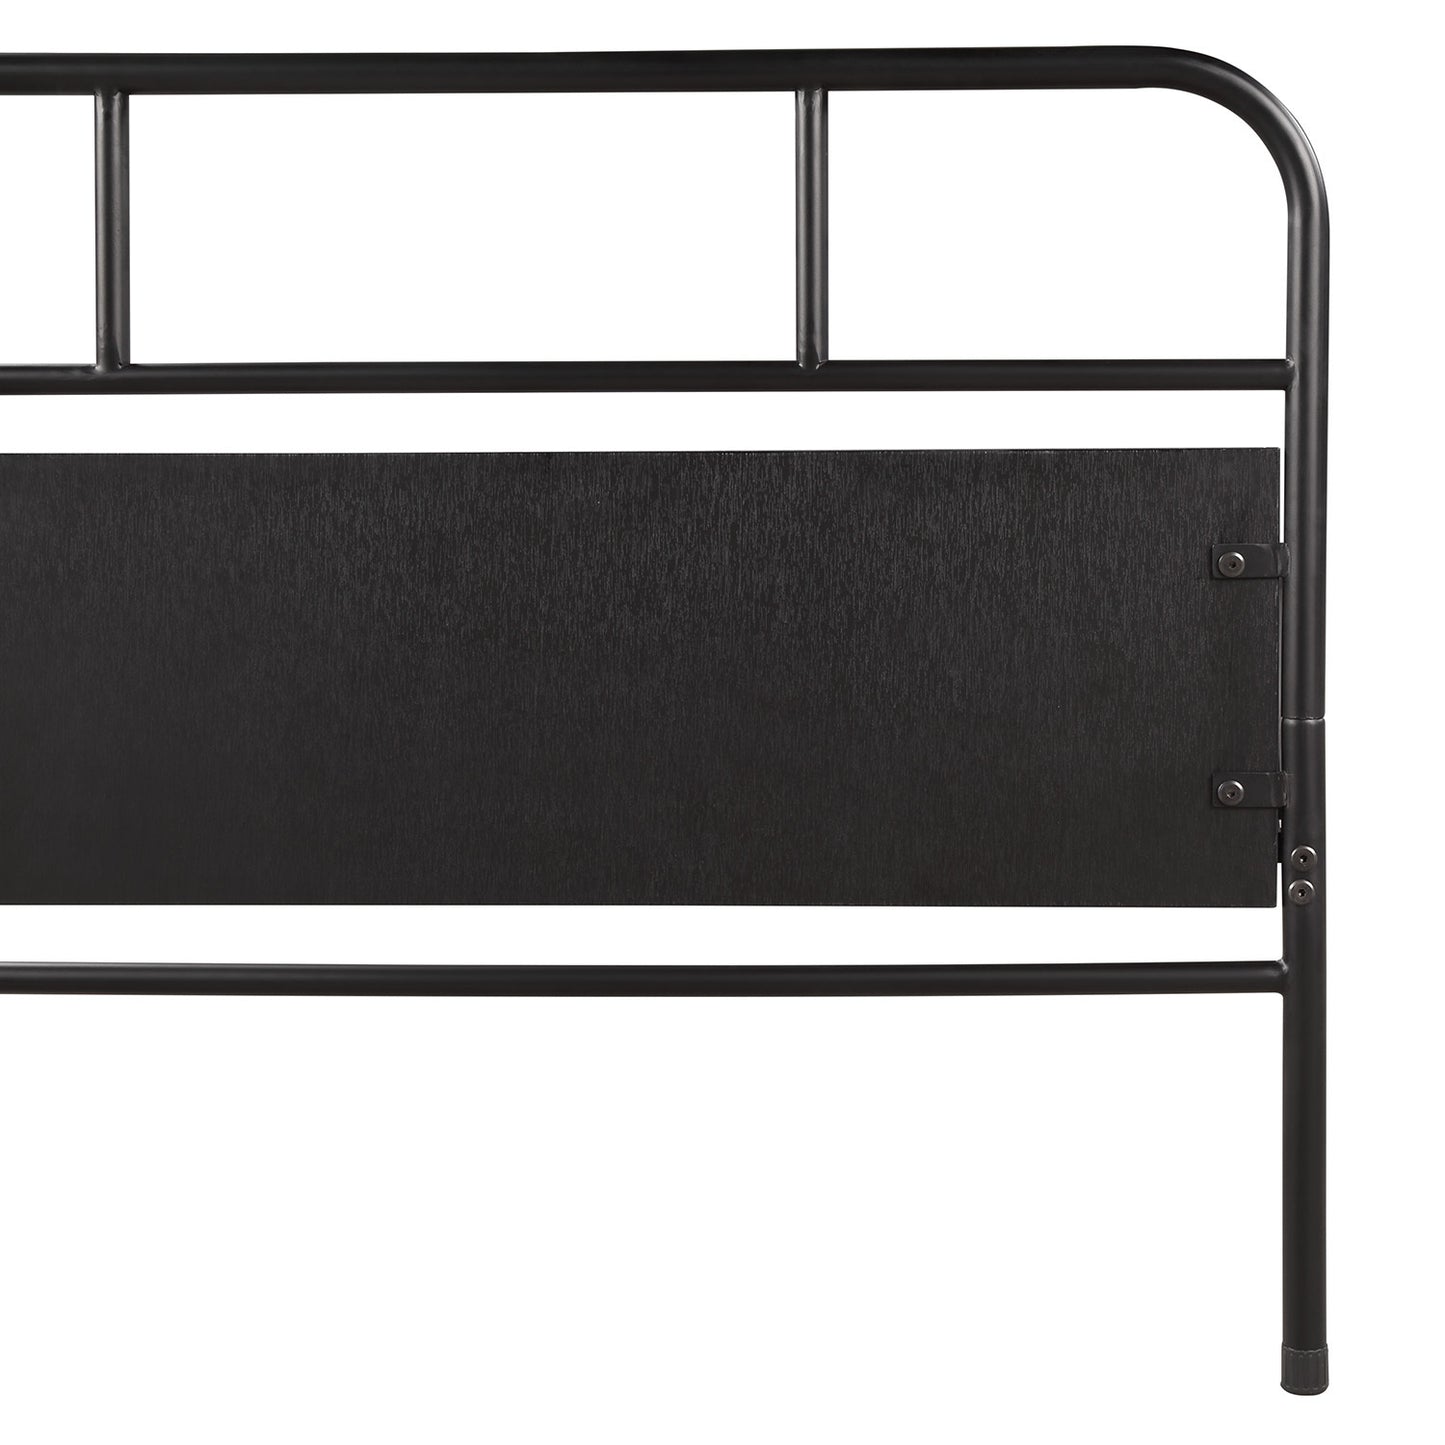 【Not allowed to sell to Walmart】Metal Daybed Platform Bed Frame with Trundle Built-in Casters, Twin Size